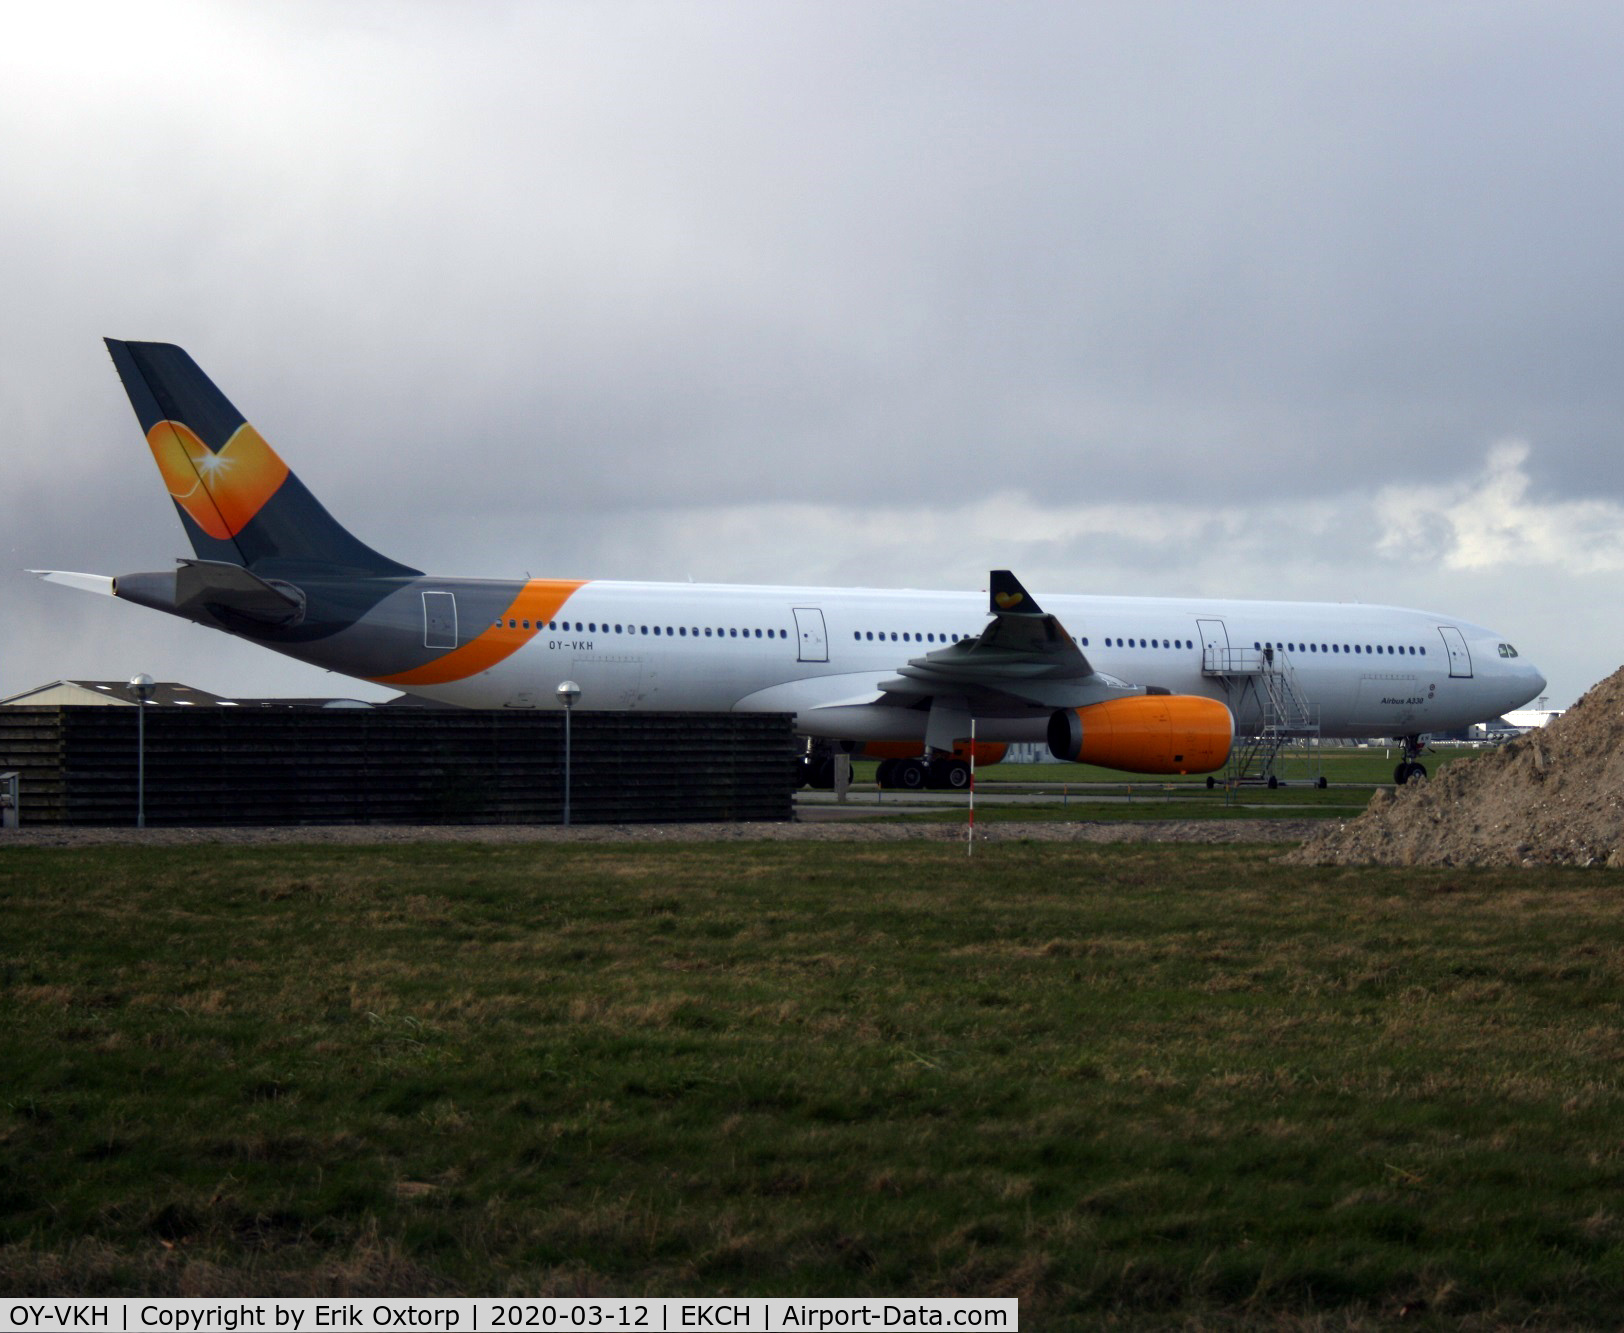 OY-VKH, 2000 Airbus A330-343X C/N 356, OY-VKH in CPH. Now without Thomas Cook titles.